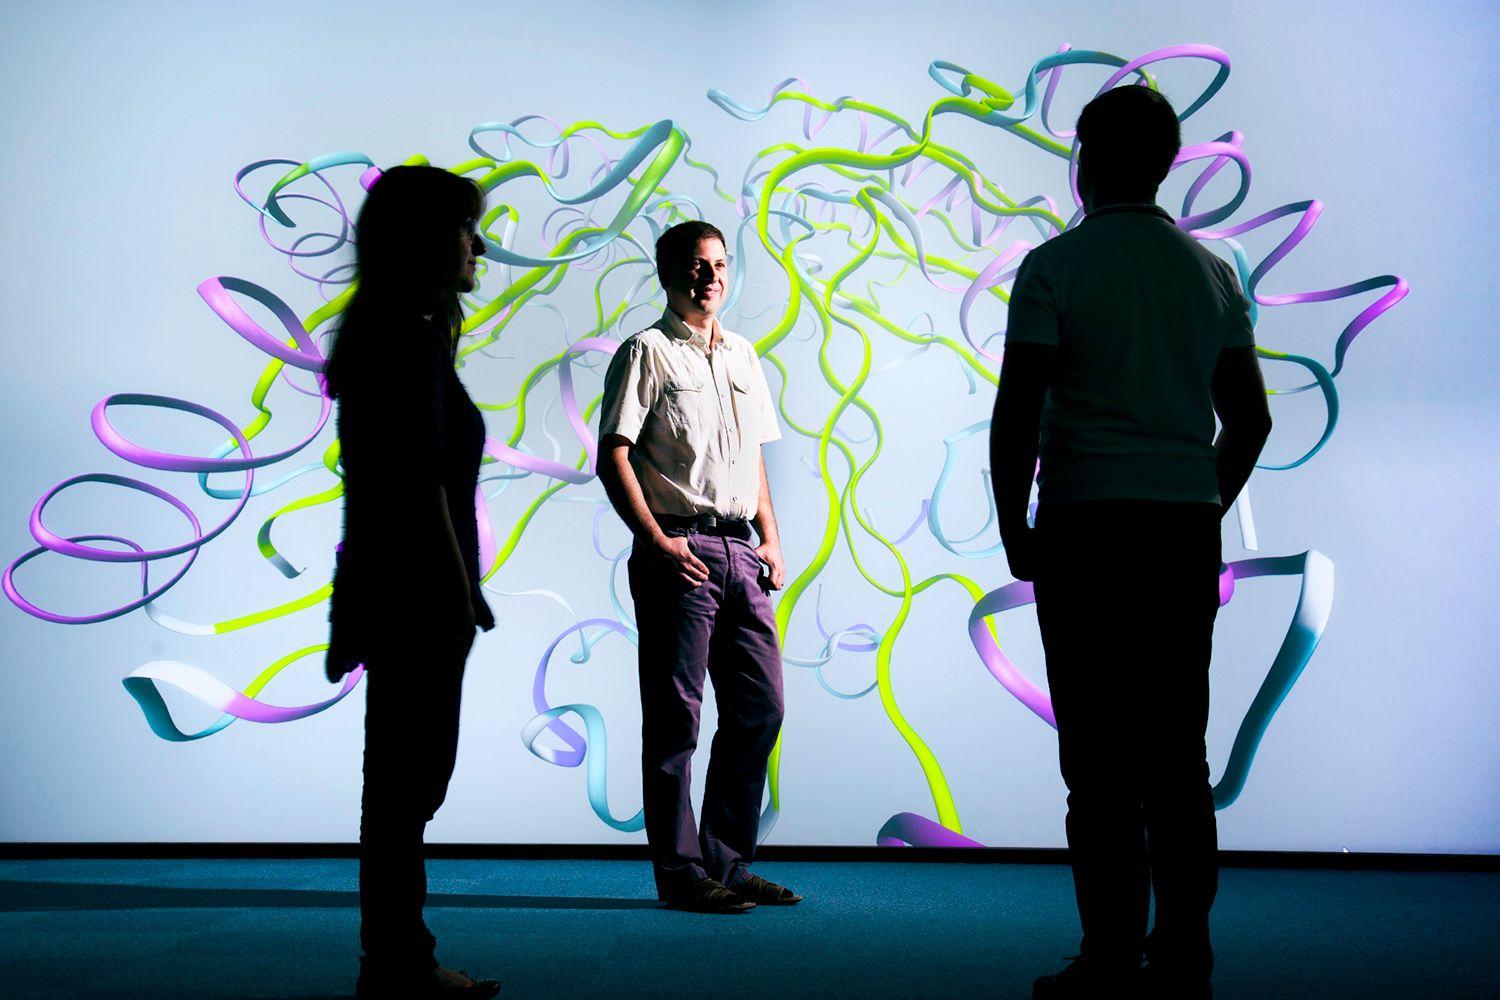 Photograph of the visualisation suite at the Hartree National Centre for Digital Innovation with three people against a backdrop of full screen wall with a ribbon diagram of a molecular structure